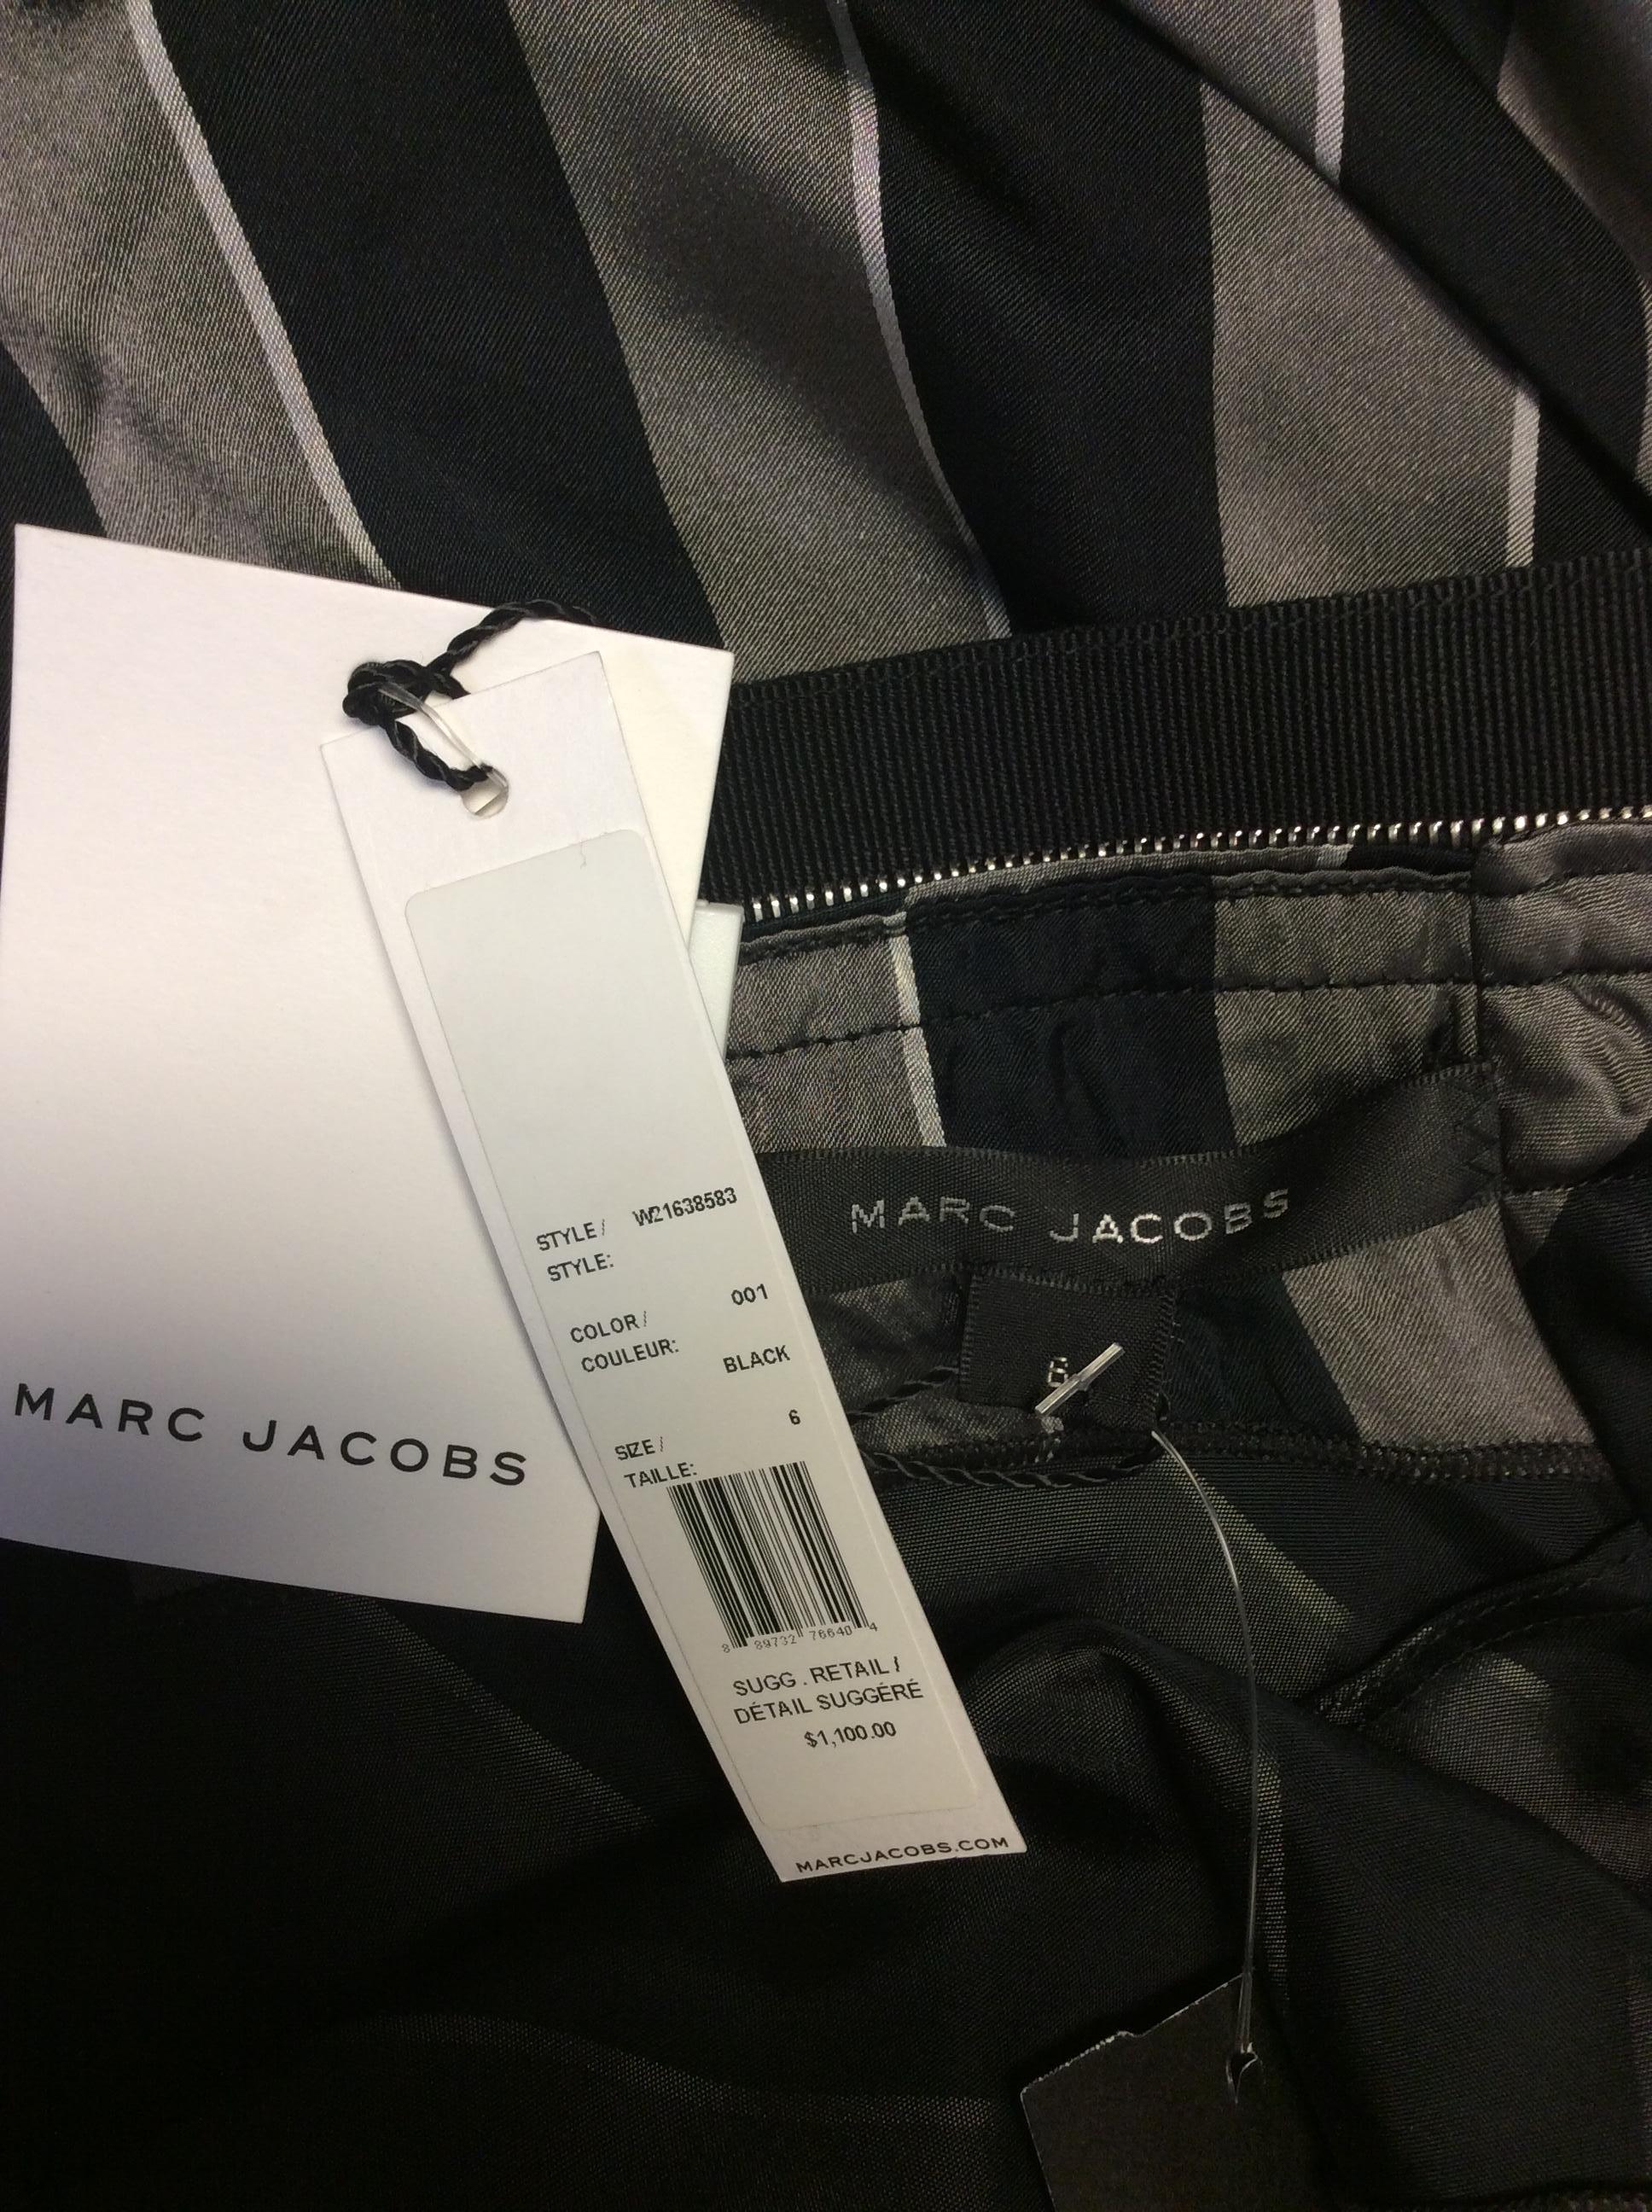 Marc Jacobs Black and Grey Stripe Dress NWT For Sale 5